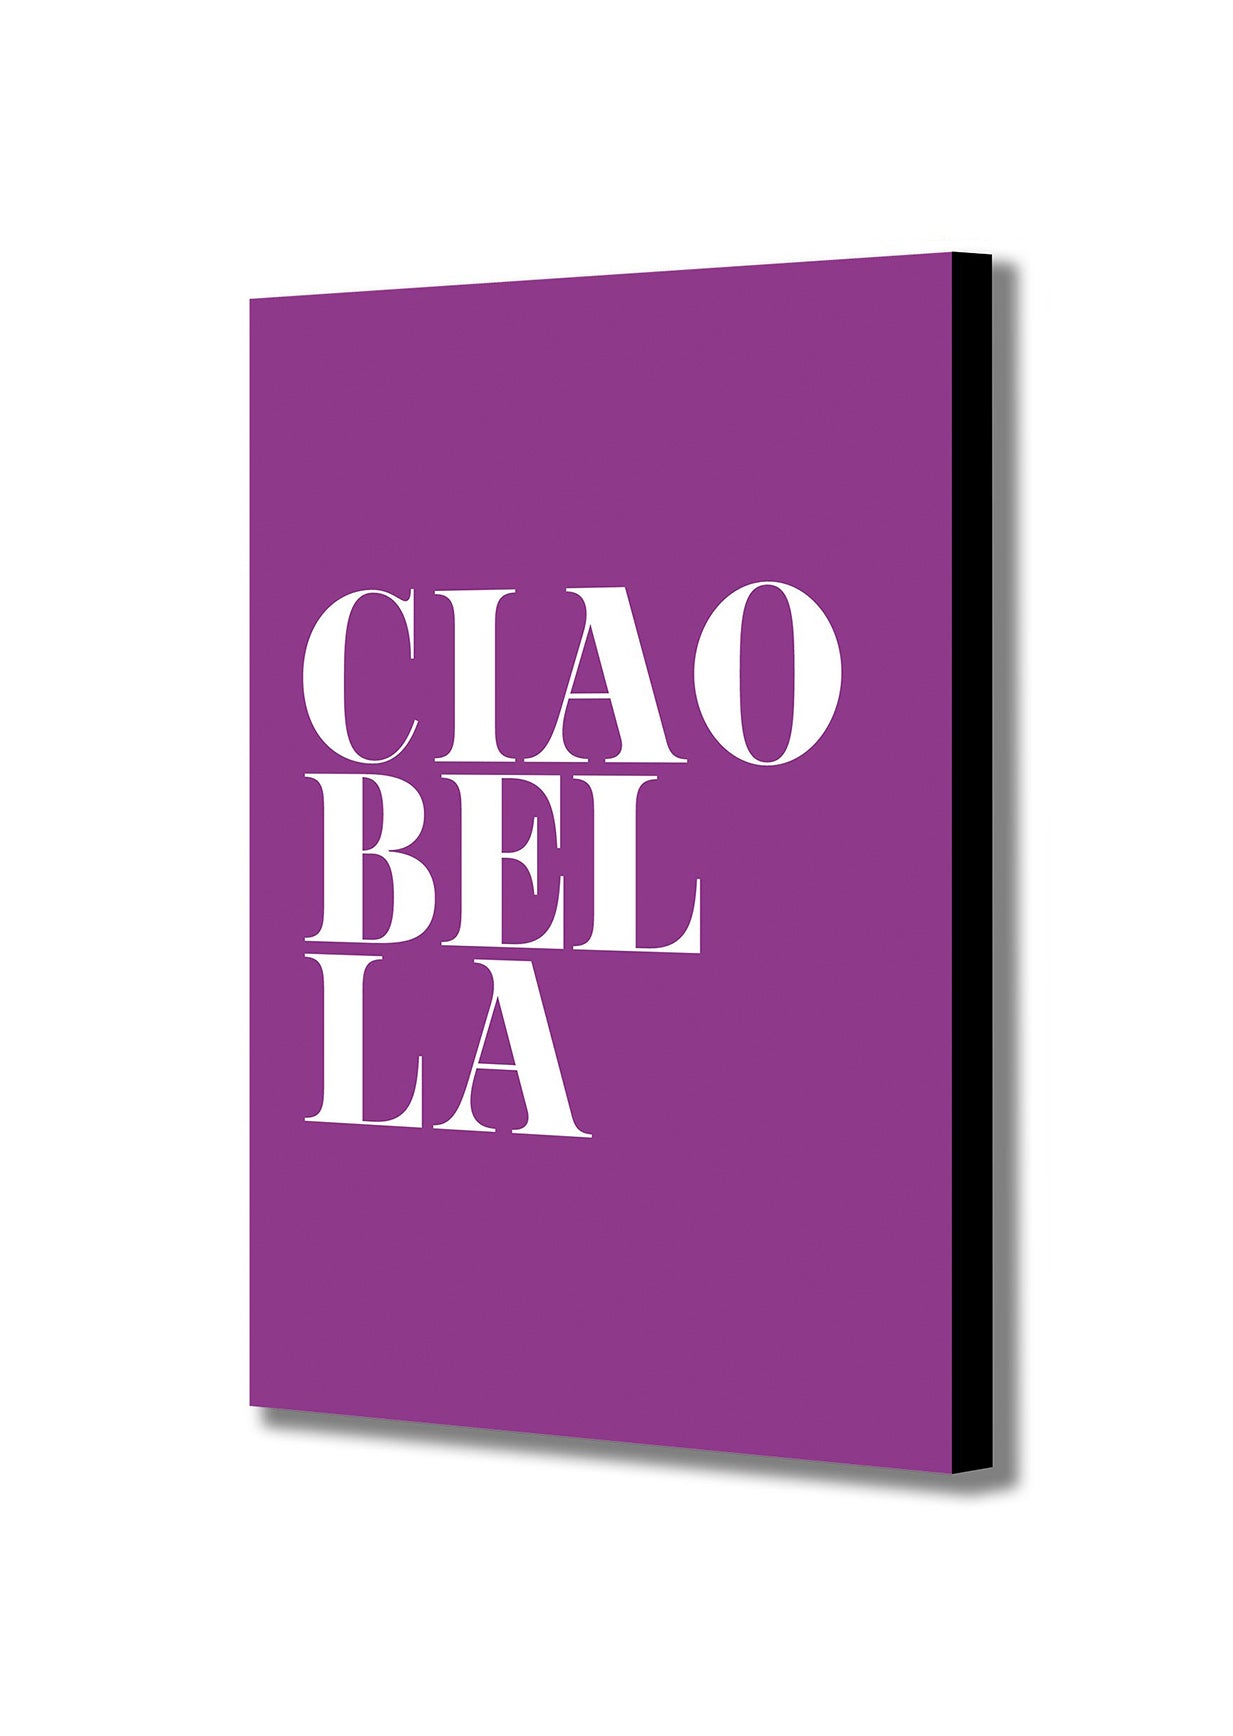 Ciao Bella purple - Typographic Art - Canvas Wall Art Framed Print - Various Sizes